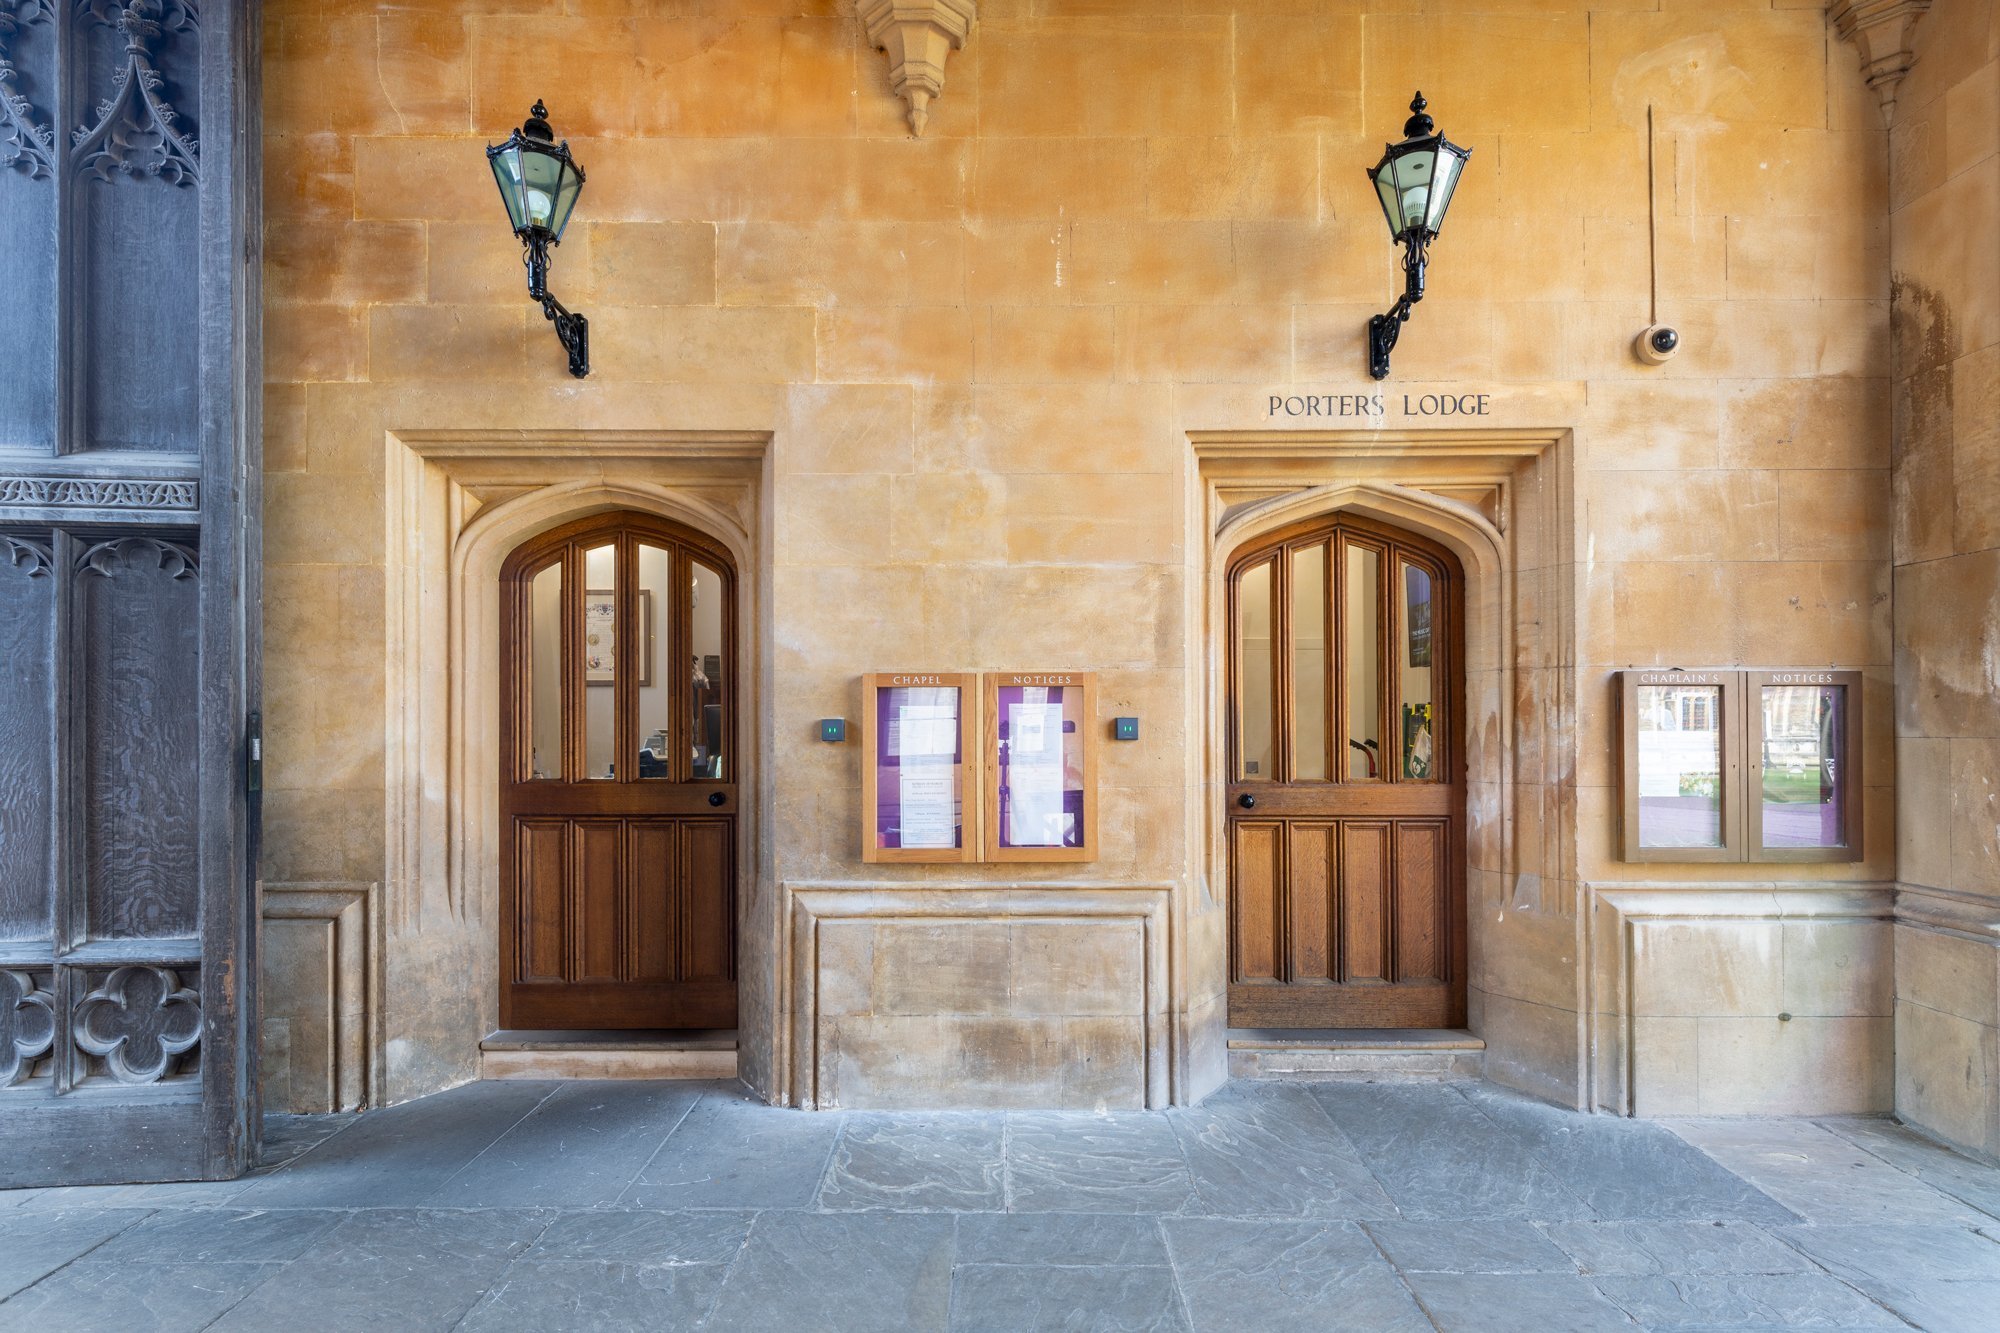 Works included the creation of a new entrance, which replaced an existing window, with new stonework installed to match the existing doorway while the existing door was refurbished.